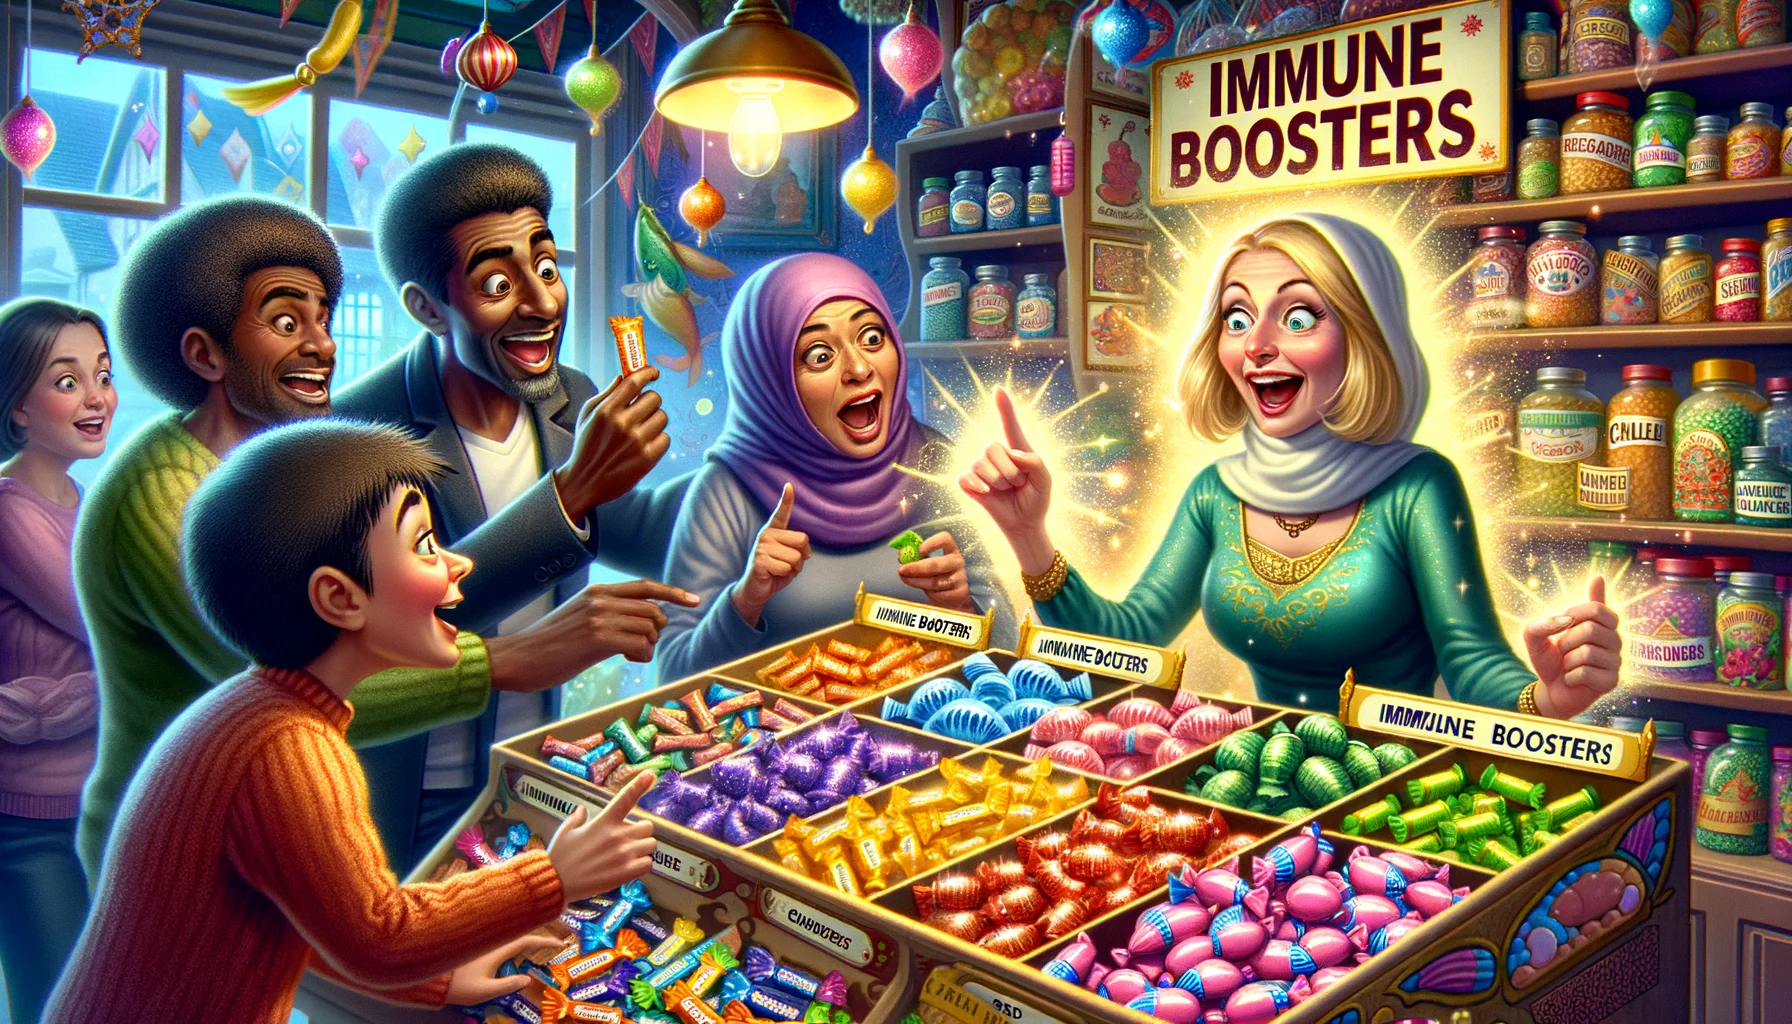 Create a humorous scene set in a whimsical candy shop. An enthusiastic South Asian female shopkeeper is presenting a bright, colourful assortment of candies labelled 'Immune Boosters'. They sparkle with an almost magical aura, making them appear even more appealing. Nearby, a Caucasian man is eagerly grabbing a handful with a broad, comical grin on his face, while a Black woman is cautiously but curiously examining another piece, skeptical but amused. In the corner of the shop, a Middle-Eastern child with wide-eyed wonder is excitedly pointing at the candies.